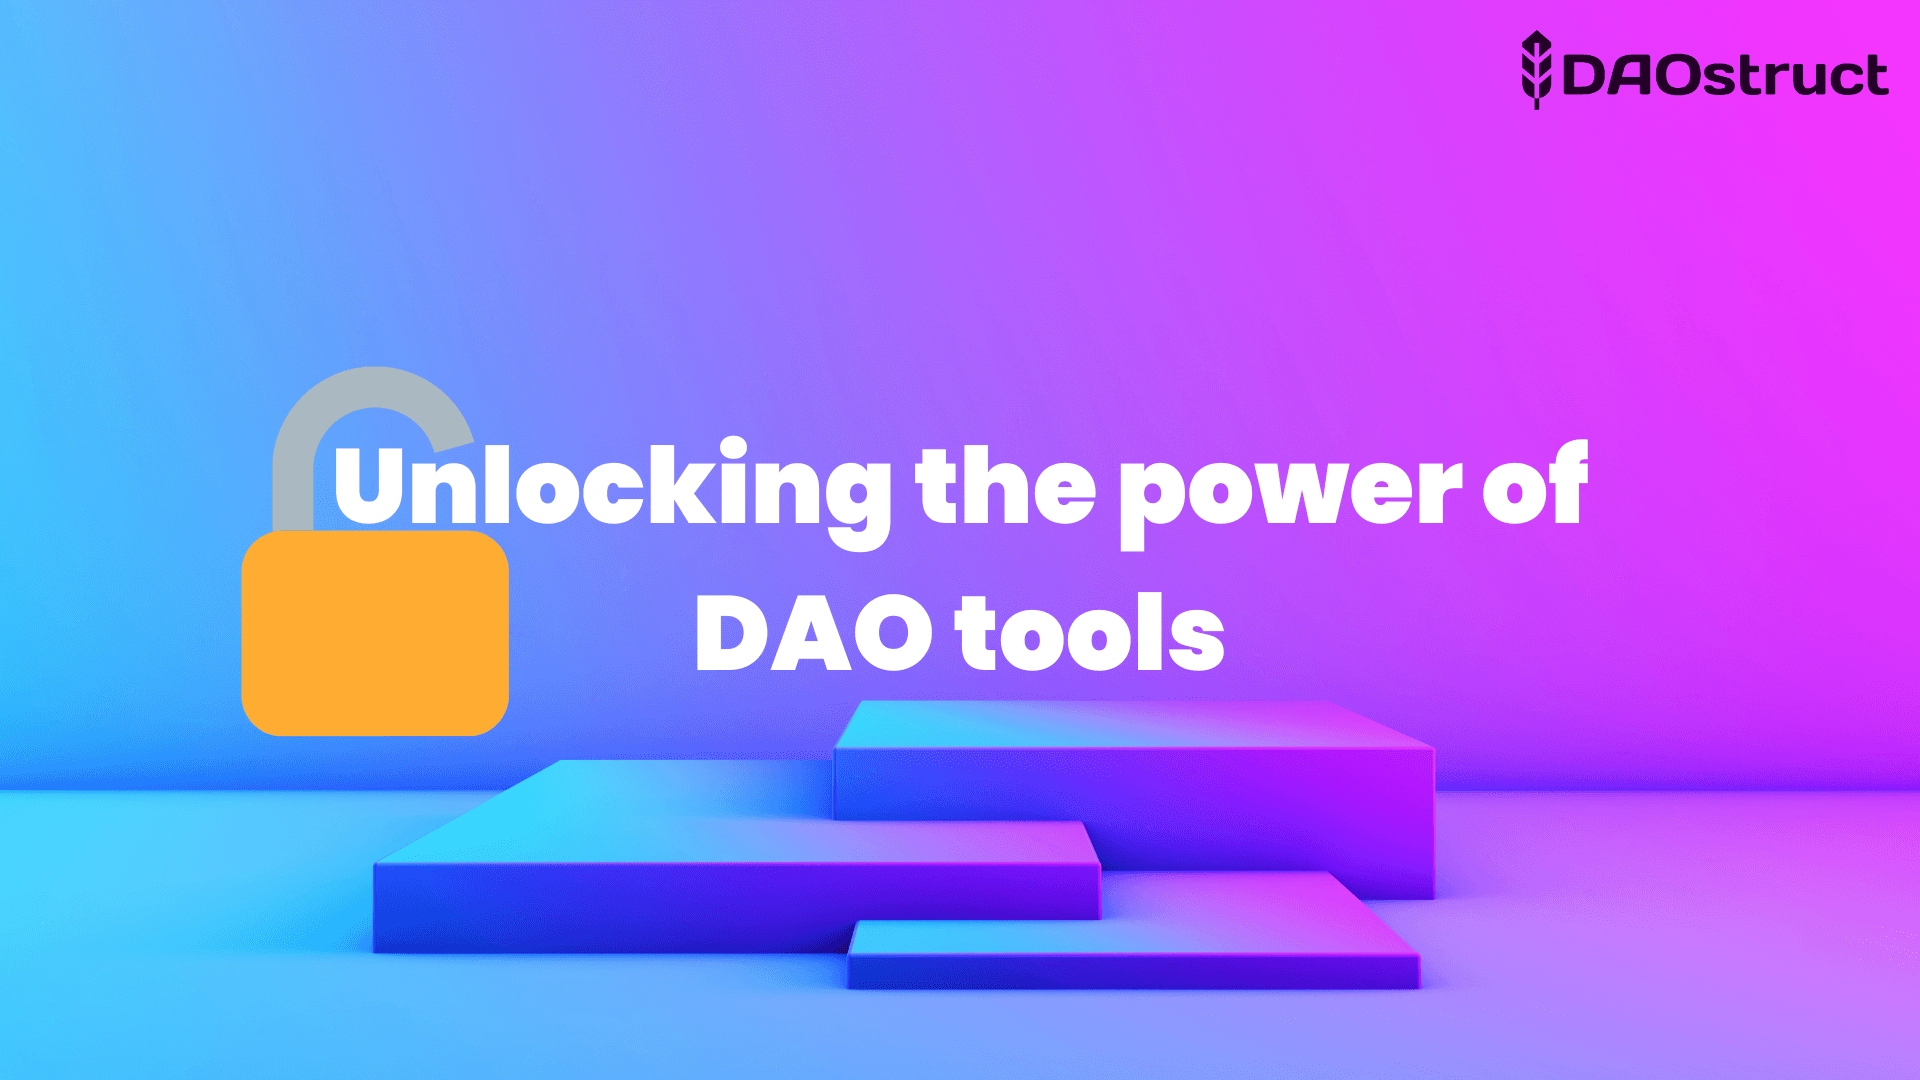 Unlocking the power of DAO tools: How to supercharge your business in a decentralized world